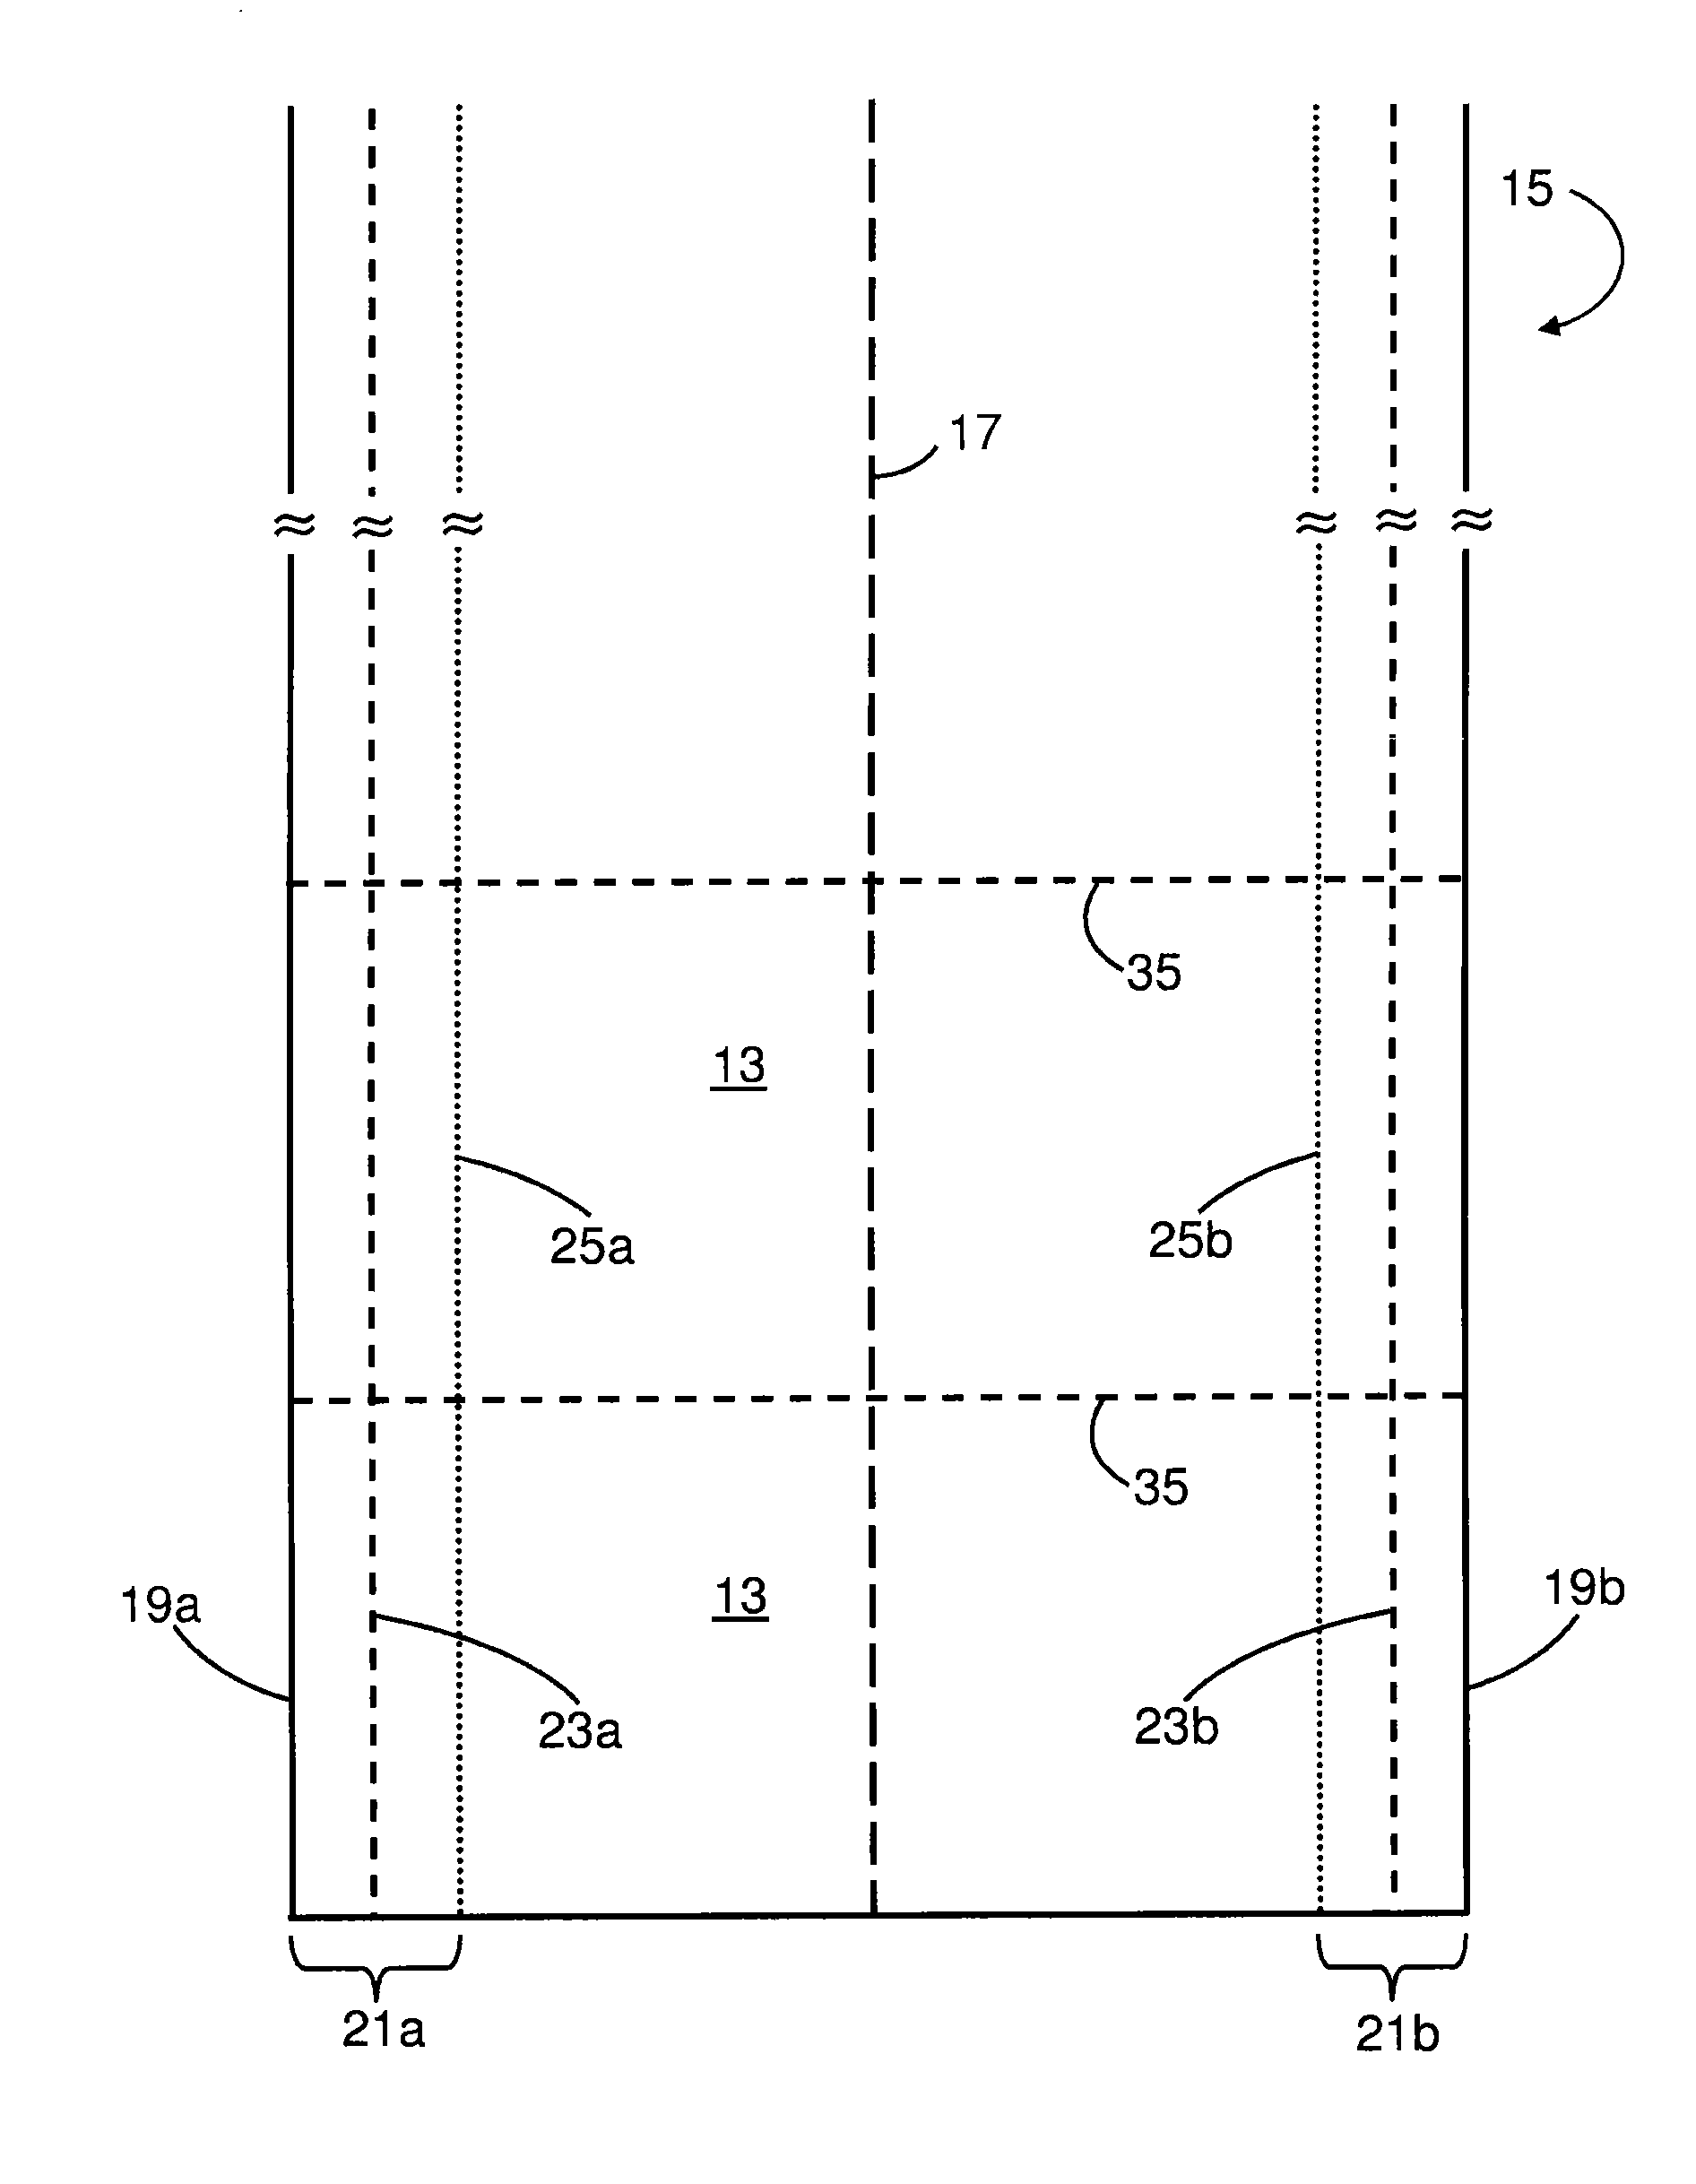 Thermal control of the bead portion of a glass ribbon